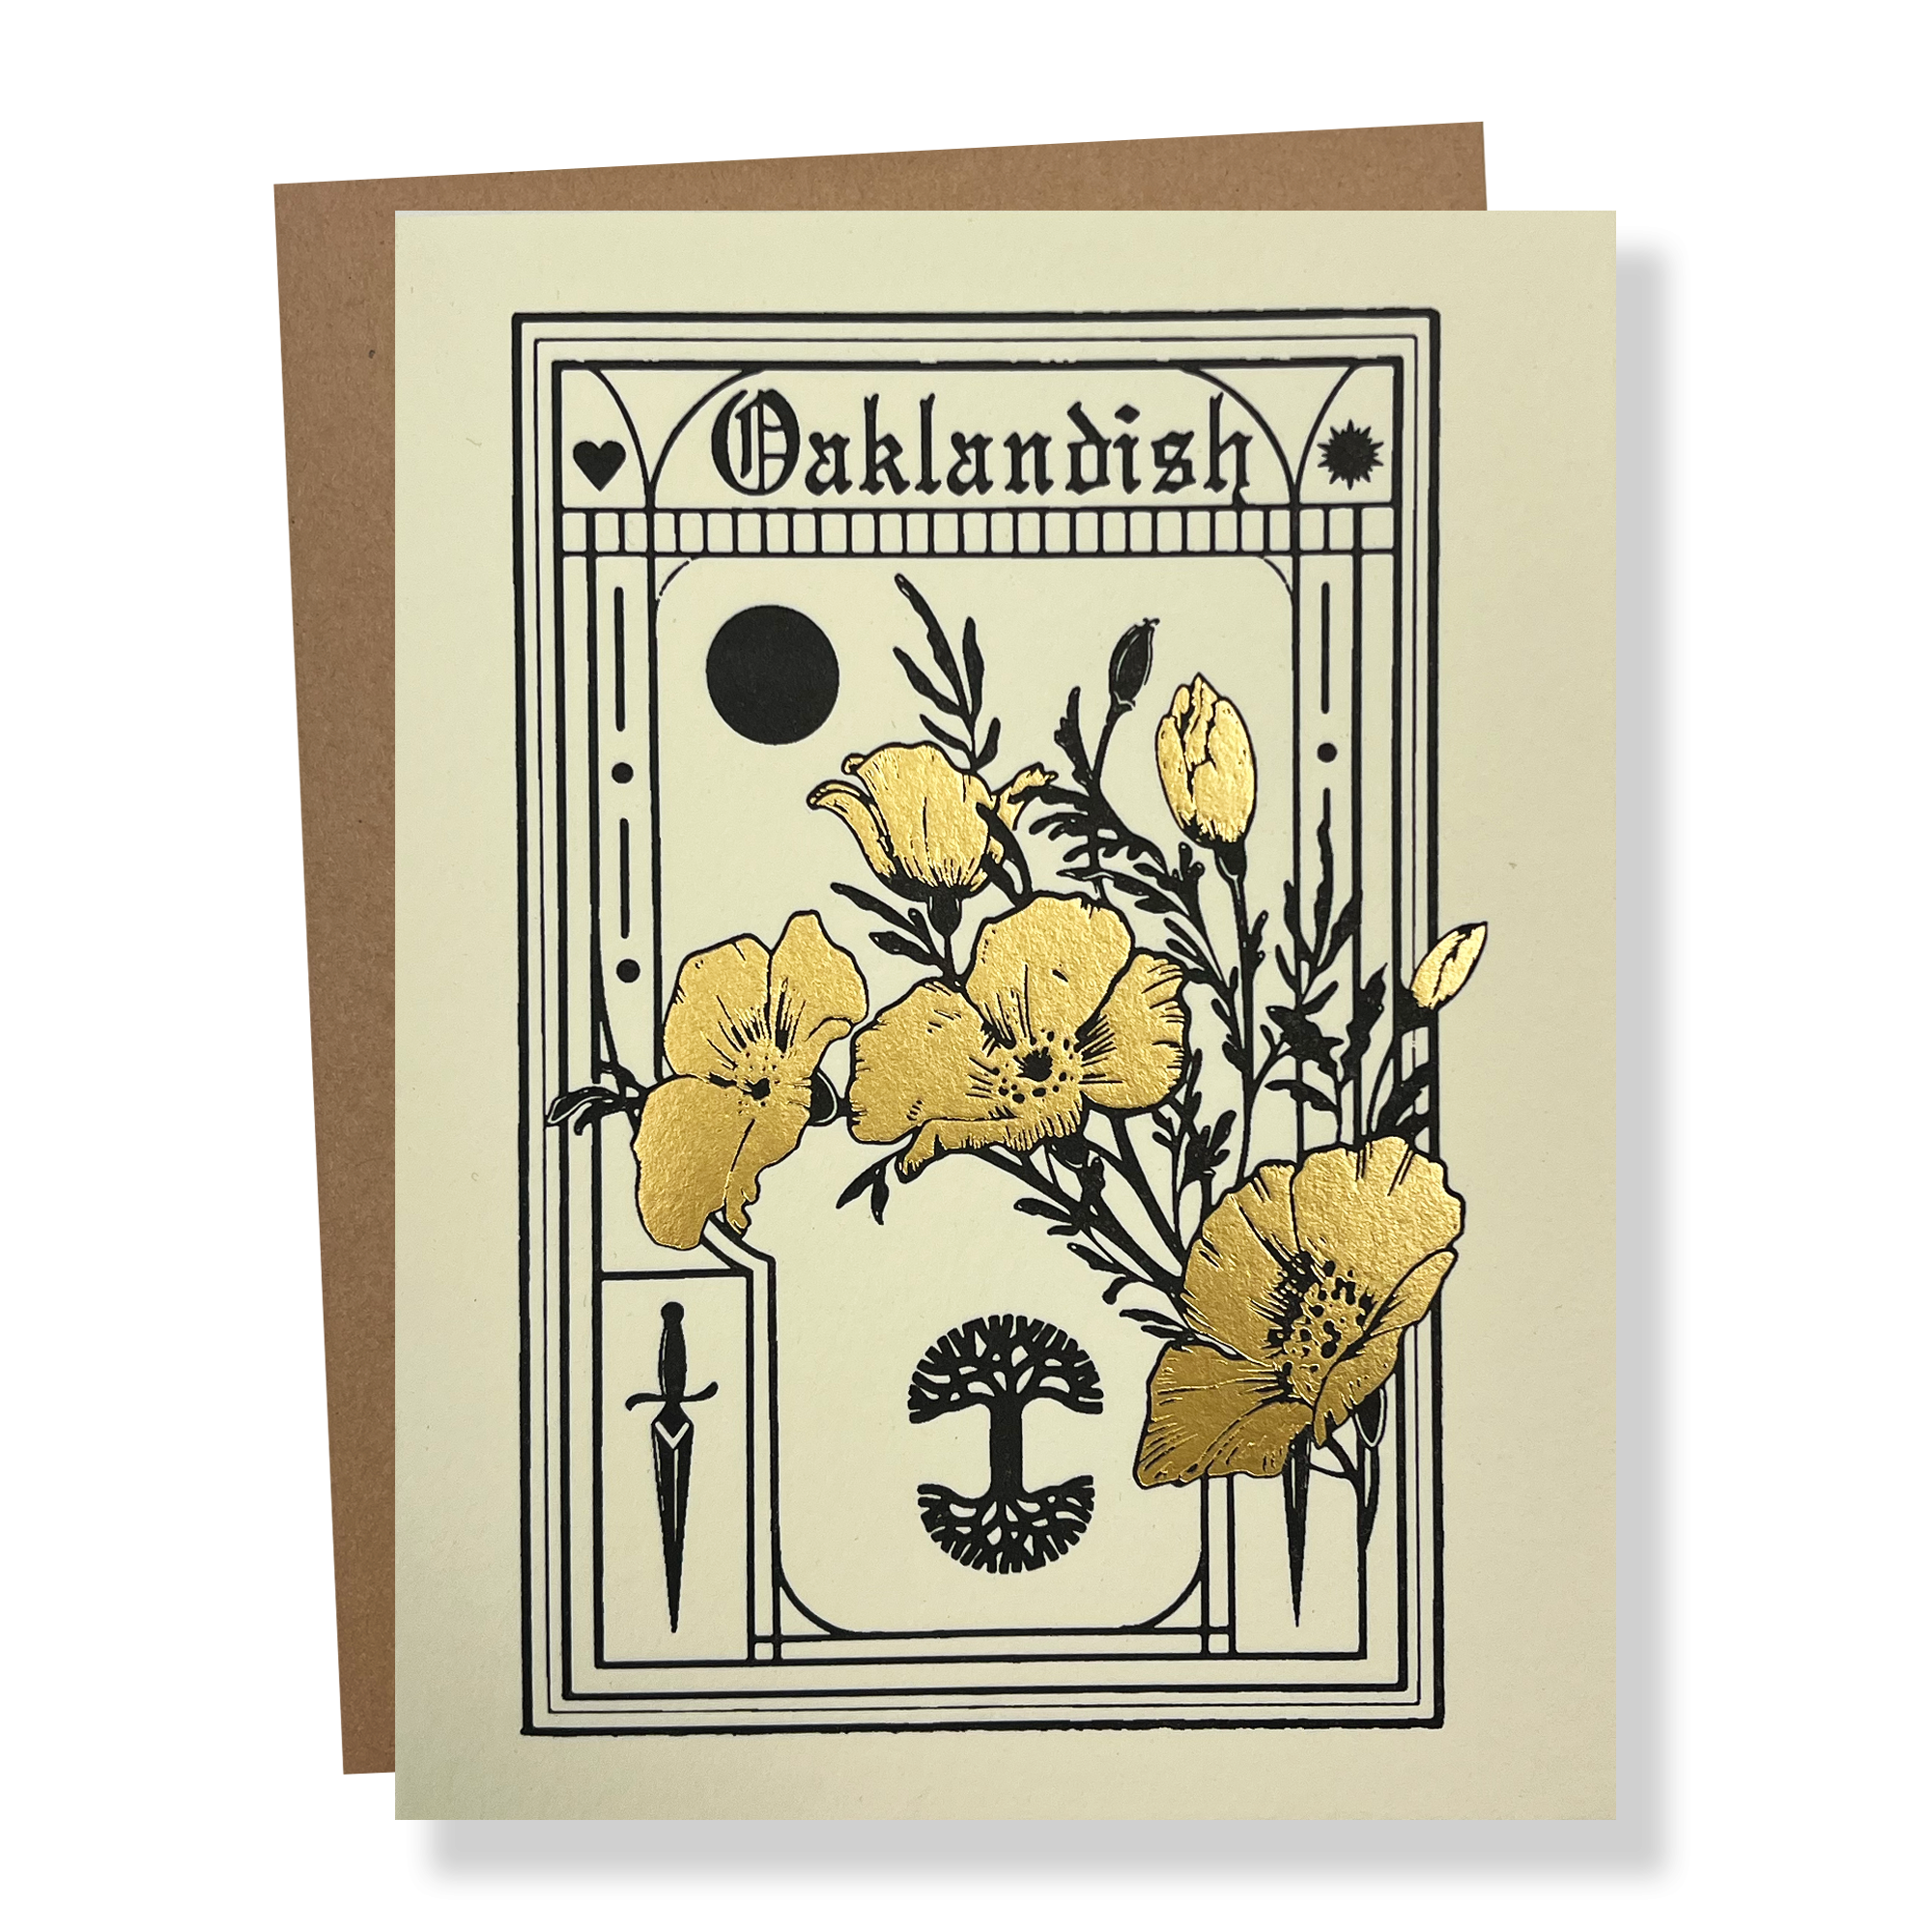 Close-up front view of greeting card & envelope with Oaklandish Blossom design, wordmark, and tree logo in linen color.